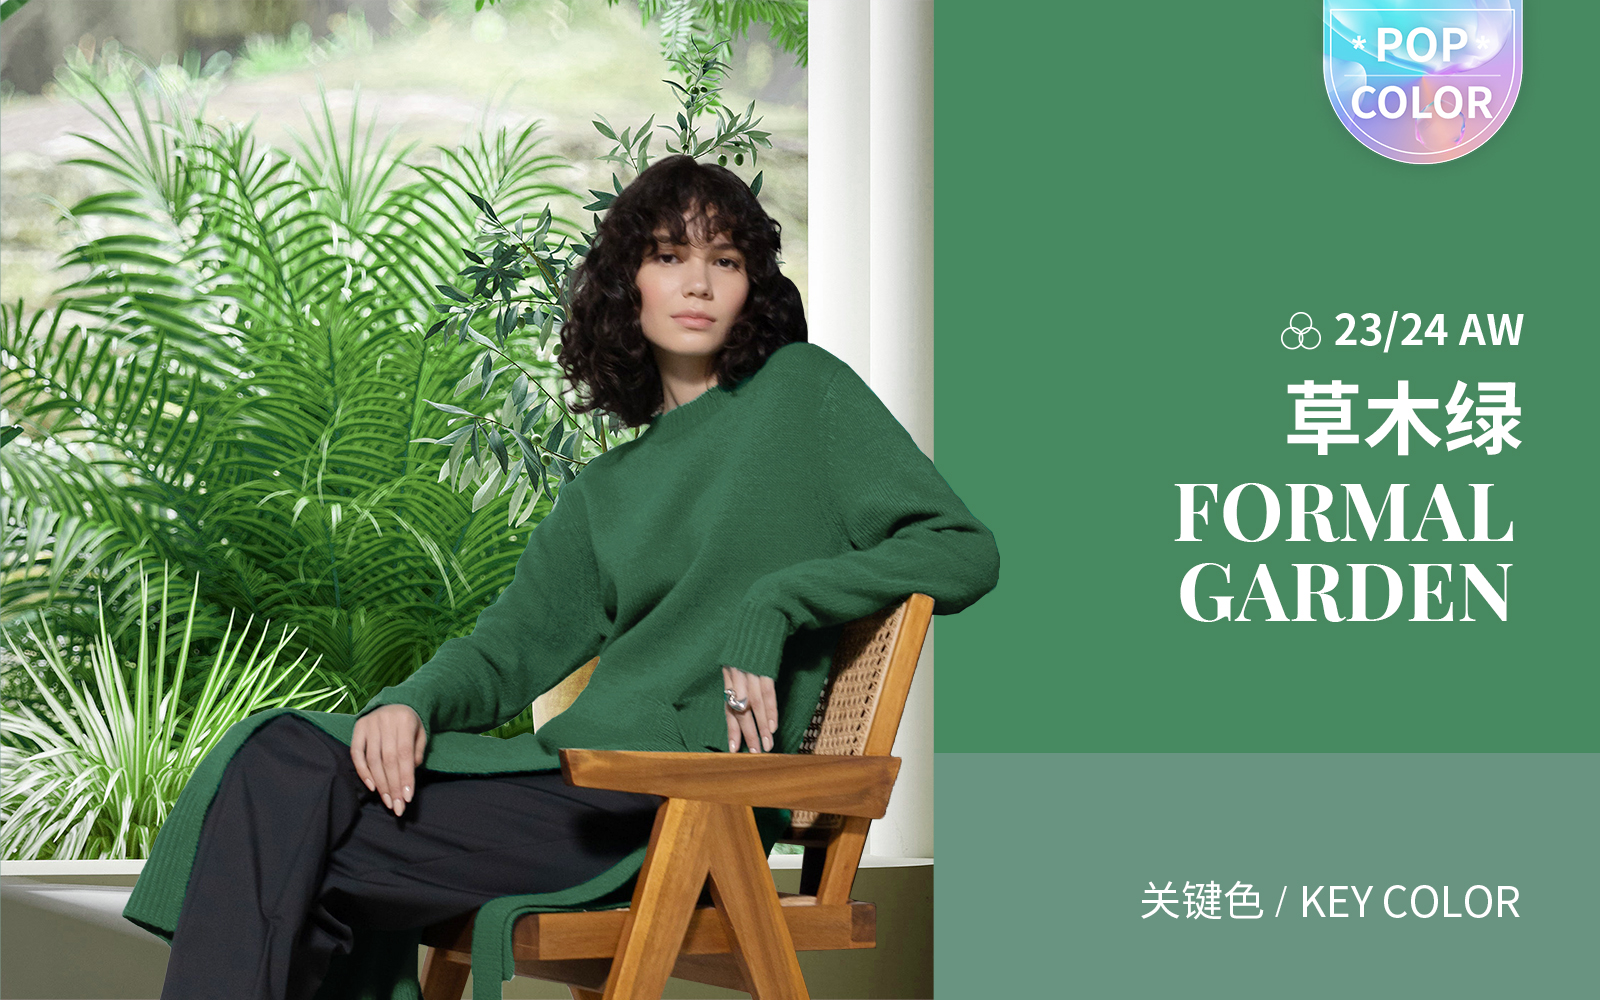 Formal Garden -- The Color Trend for Women's Knitwear(Mature Market)